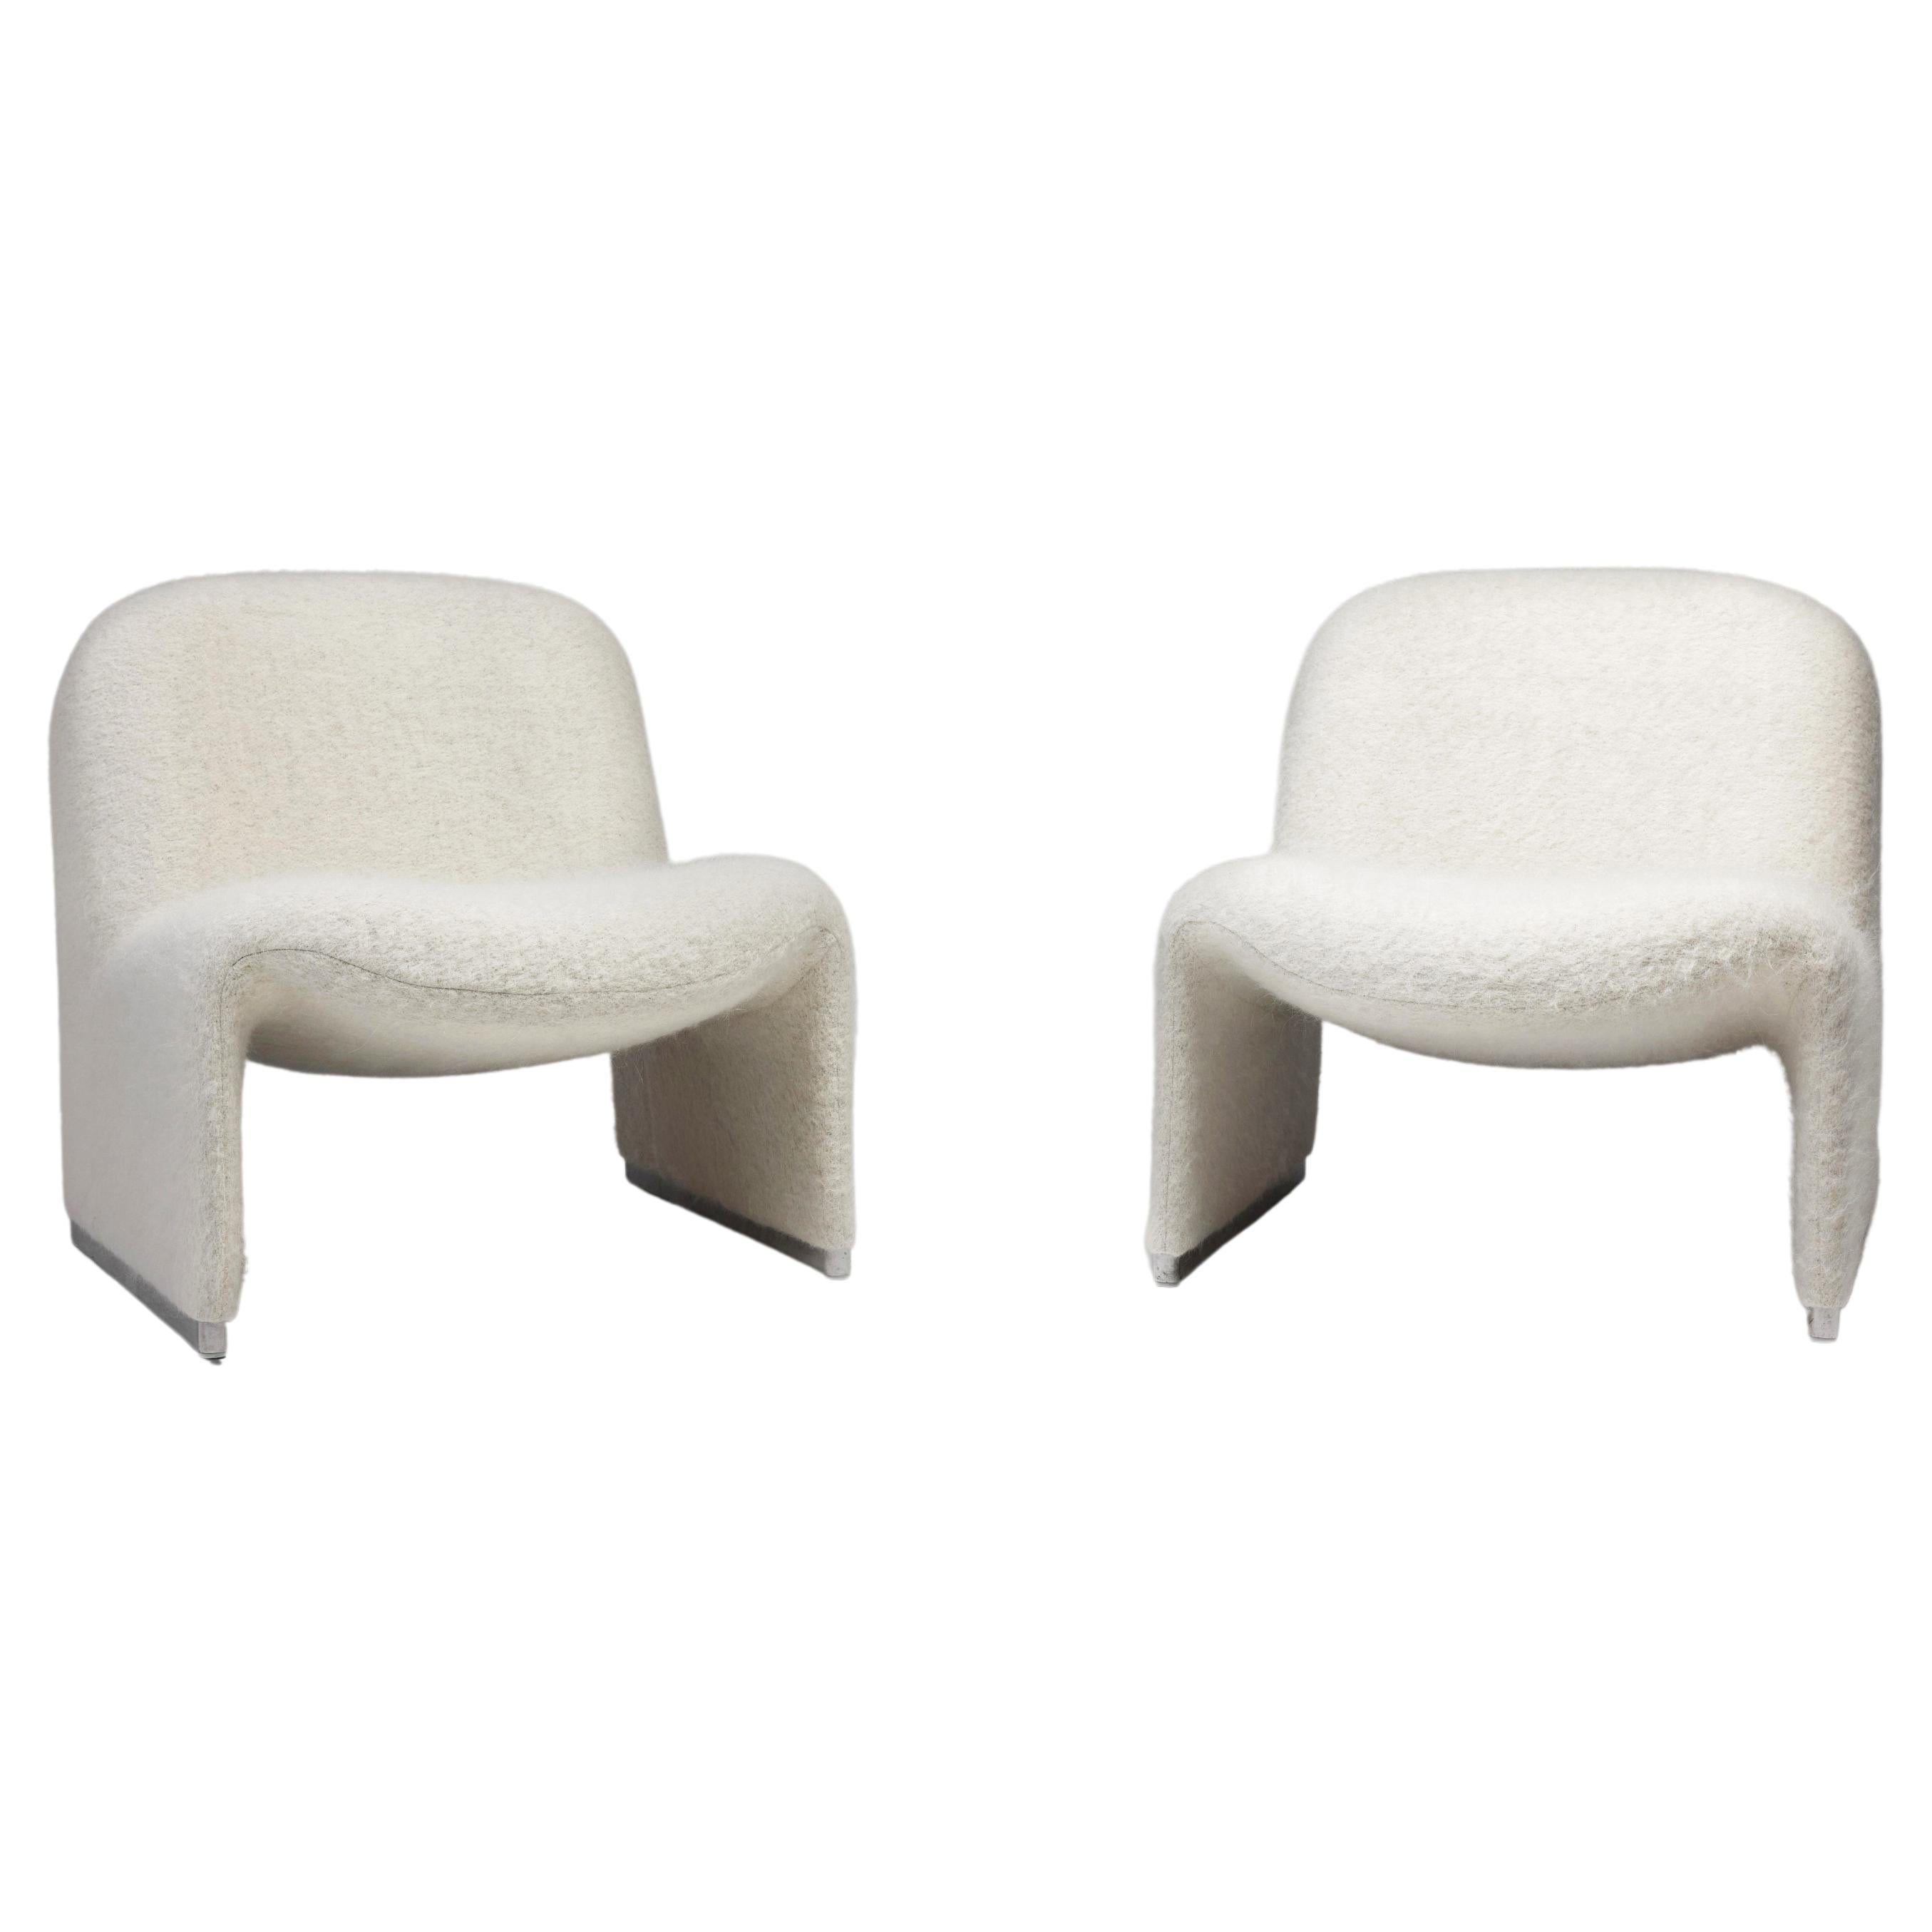 Alky Chairs by Giancarlo Piretti for Artifort in Pierre Frey, 1970s, Set of 2 For Sale